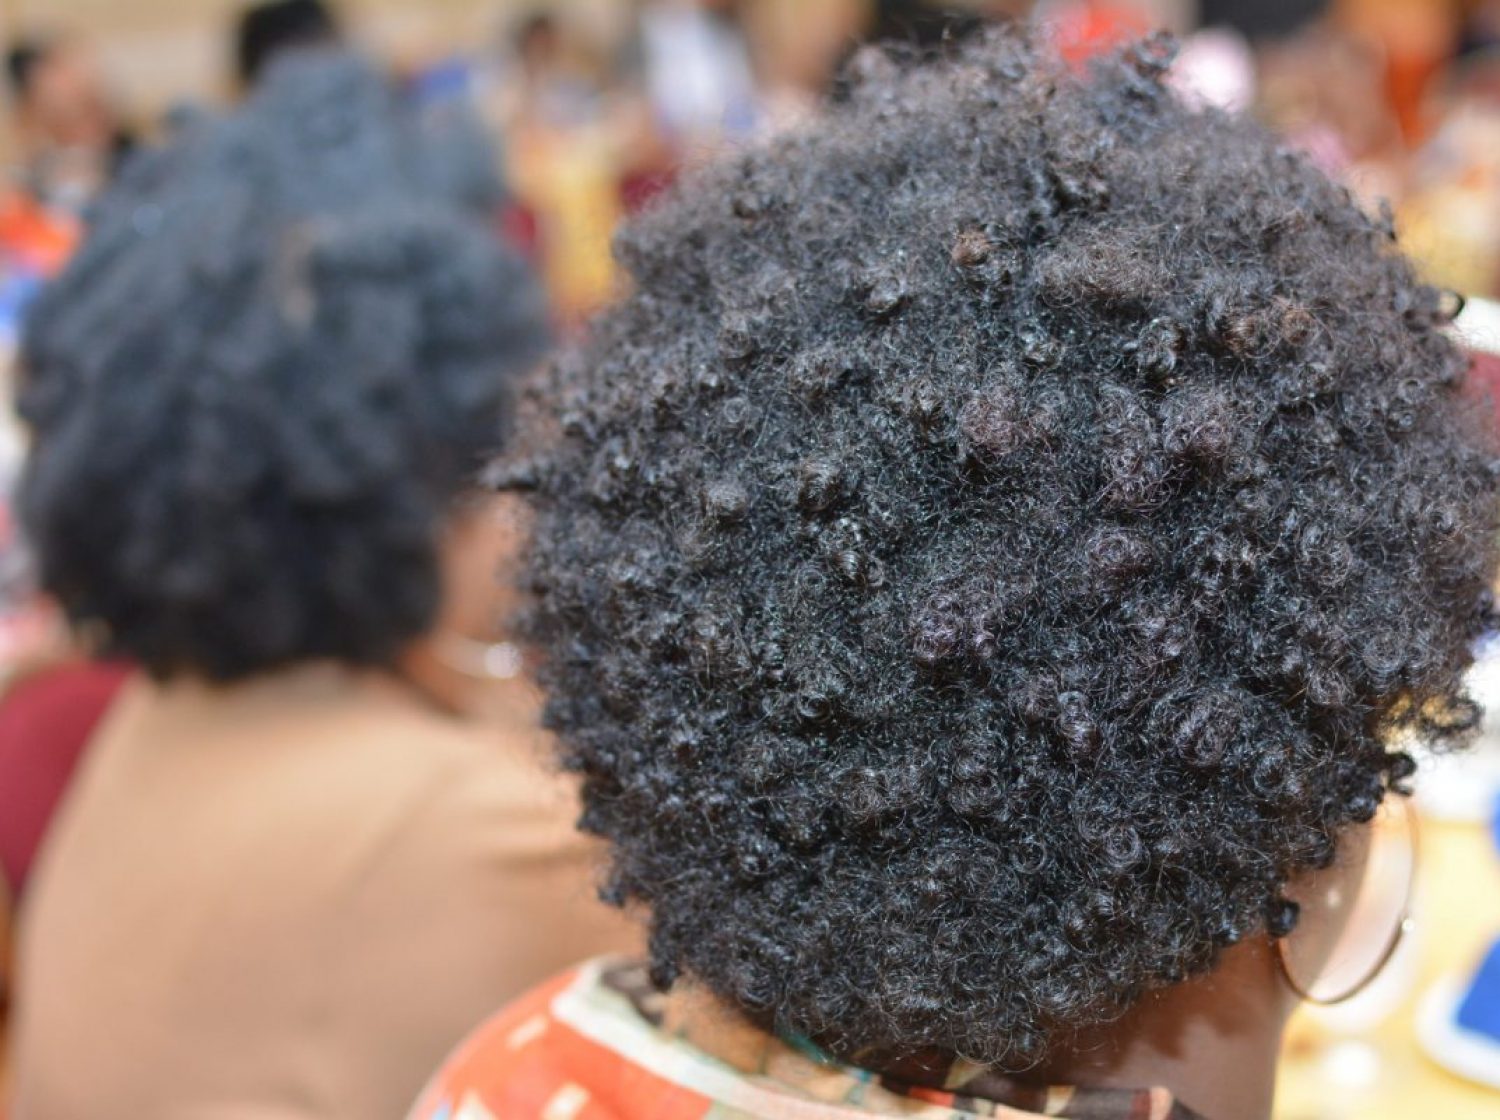 Find the best articles about Afro hairdressers on our blog – Afrocks